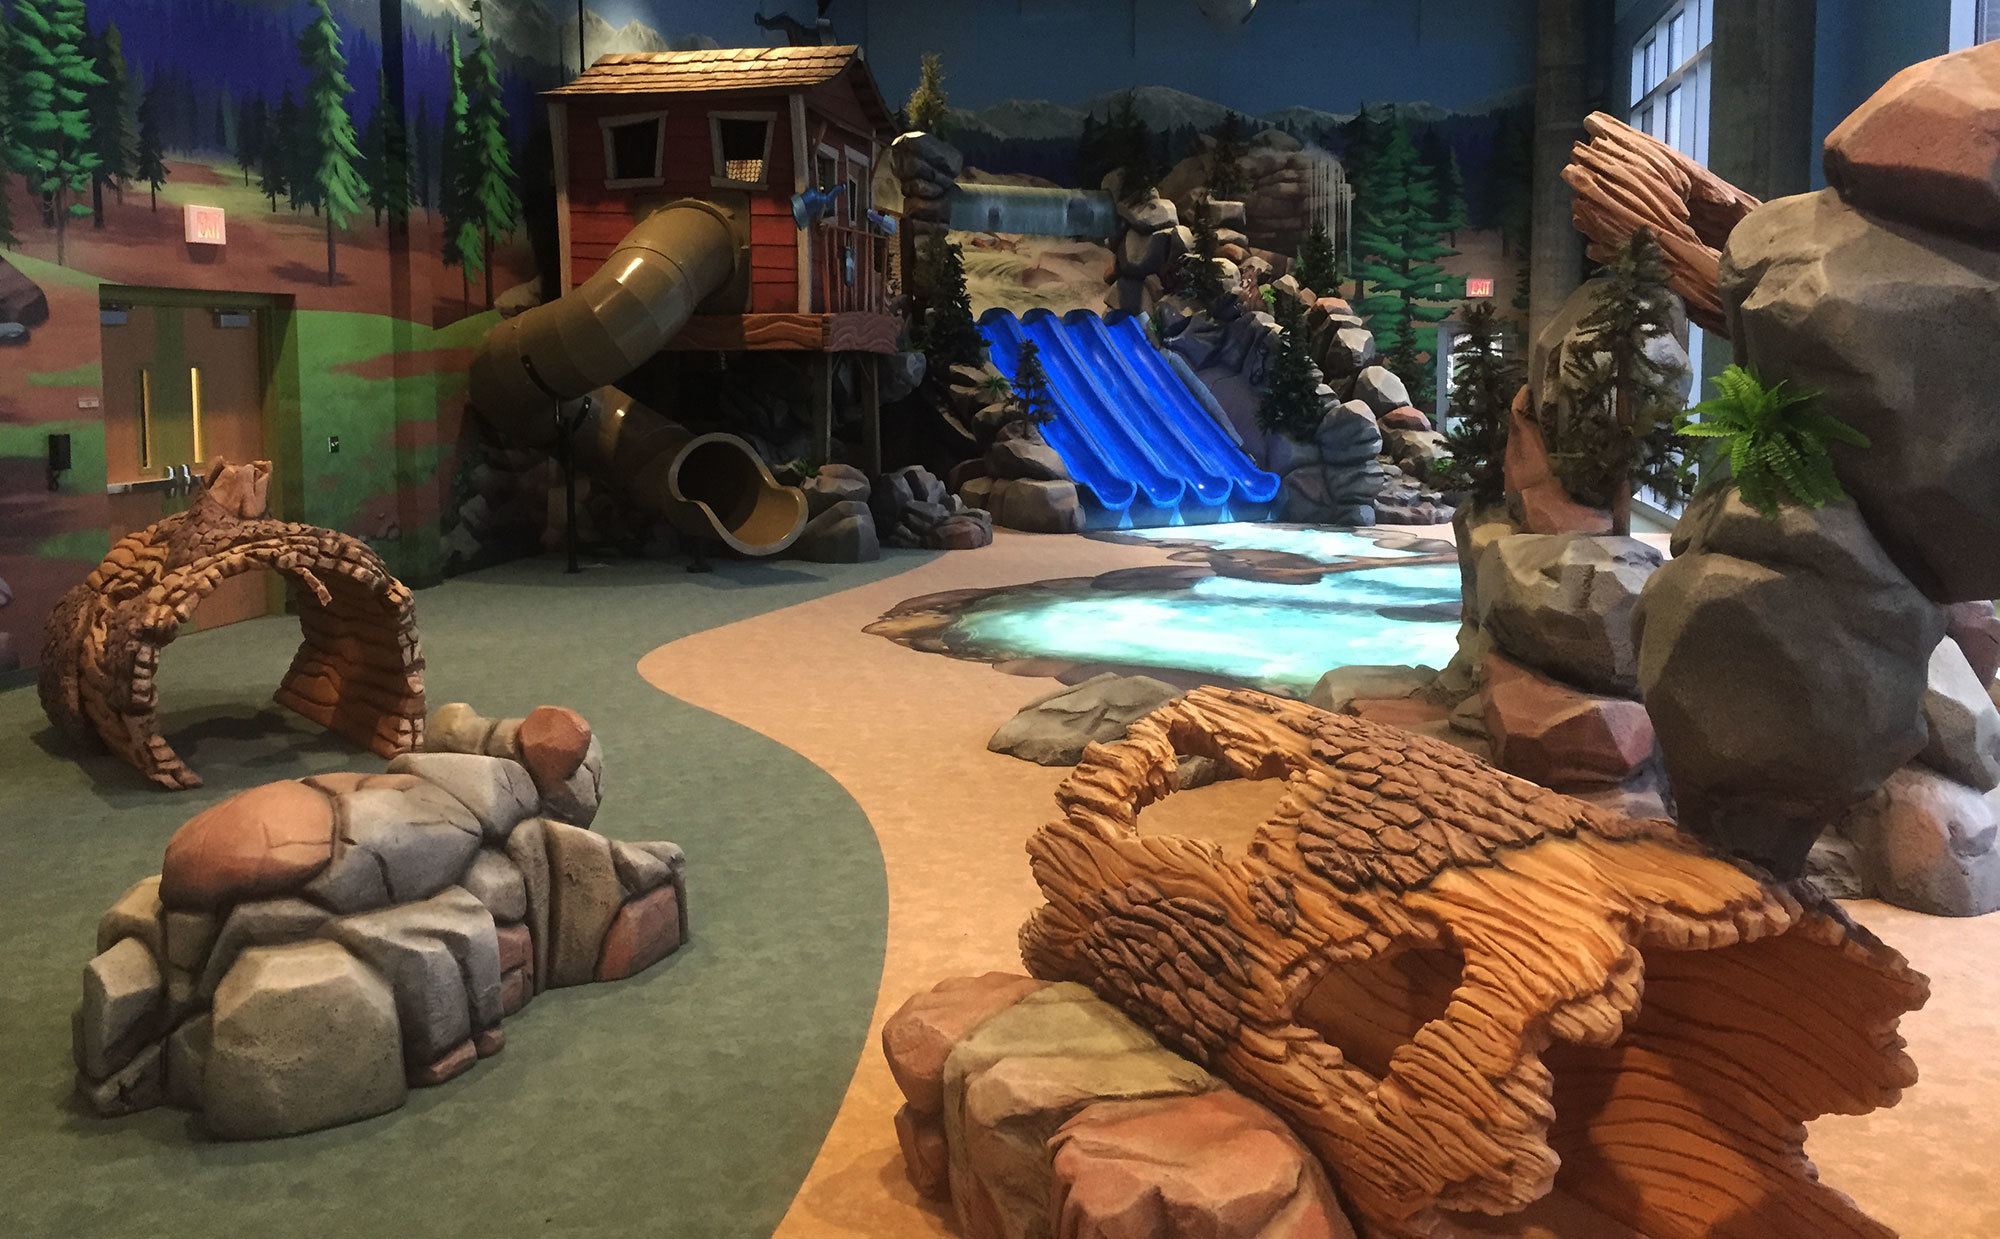 Sculpted fallen logs and rocksplus ranger station and slides in a Fully Immersive Camping Themed Environment at Abundant Life Church